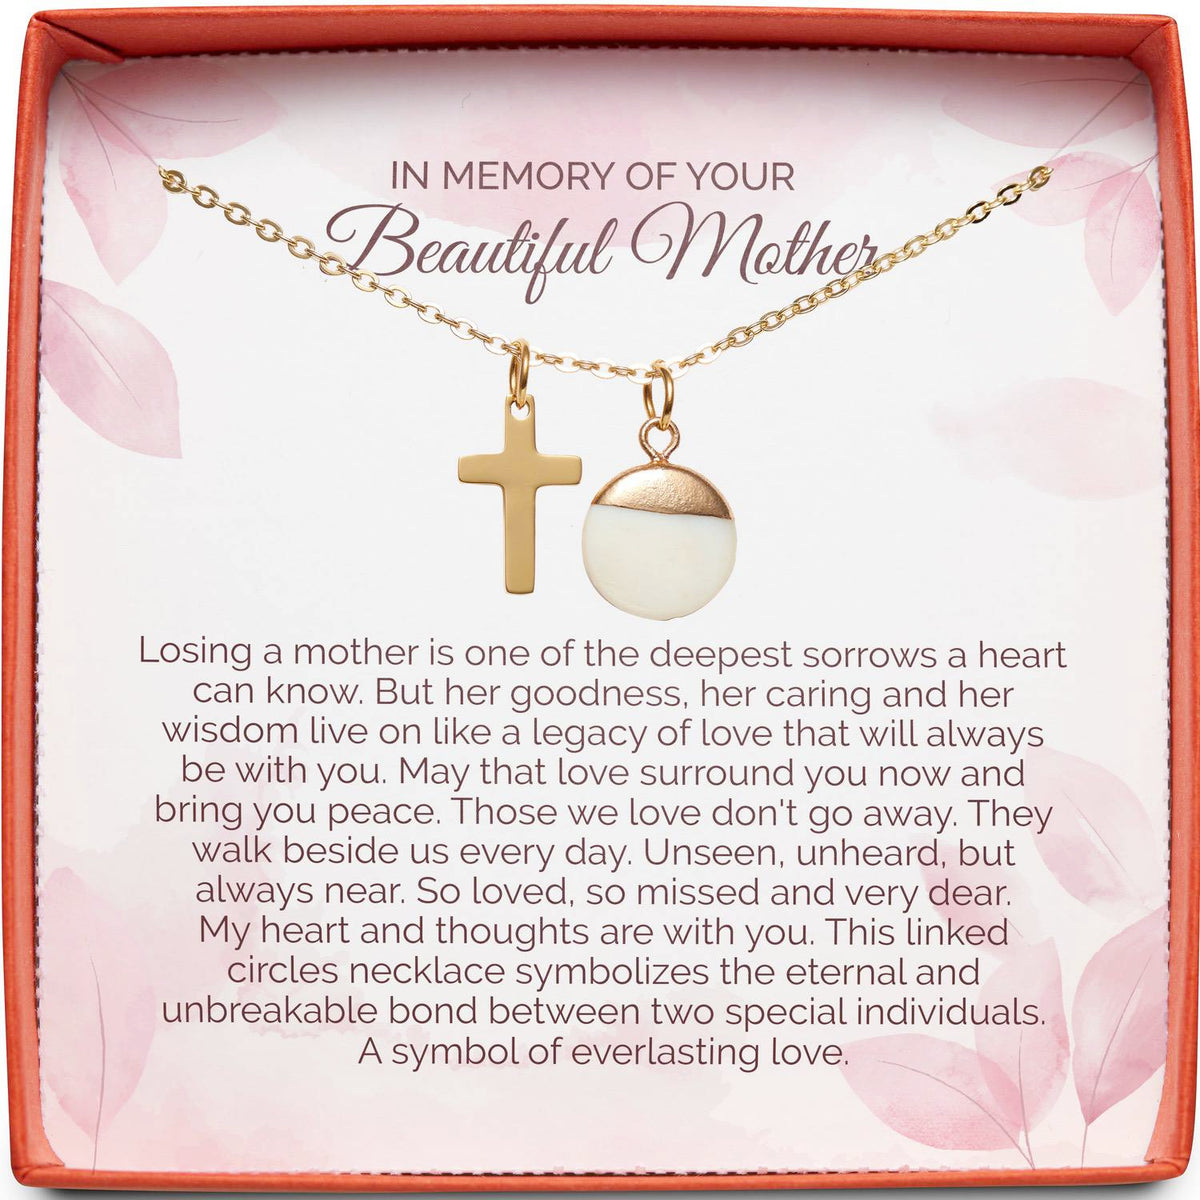 In Memory of your Beautiful Mother | Everlasting Love | Cross Necklace